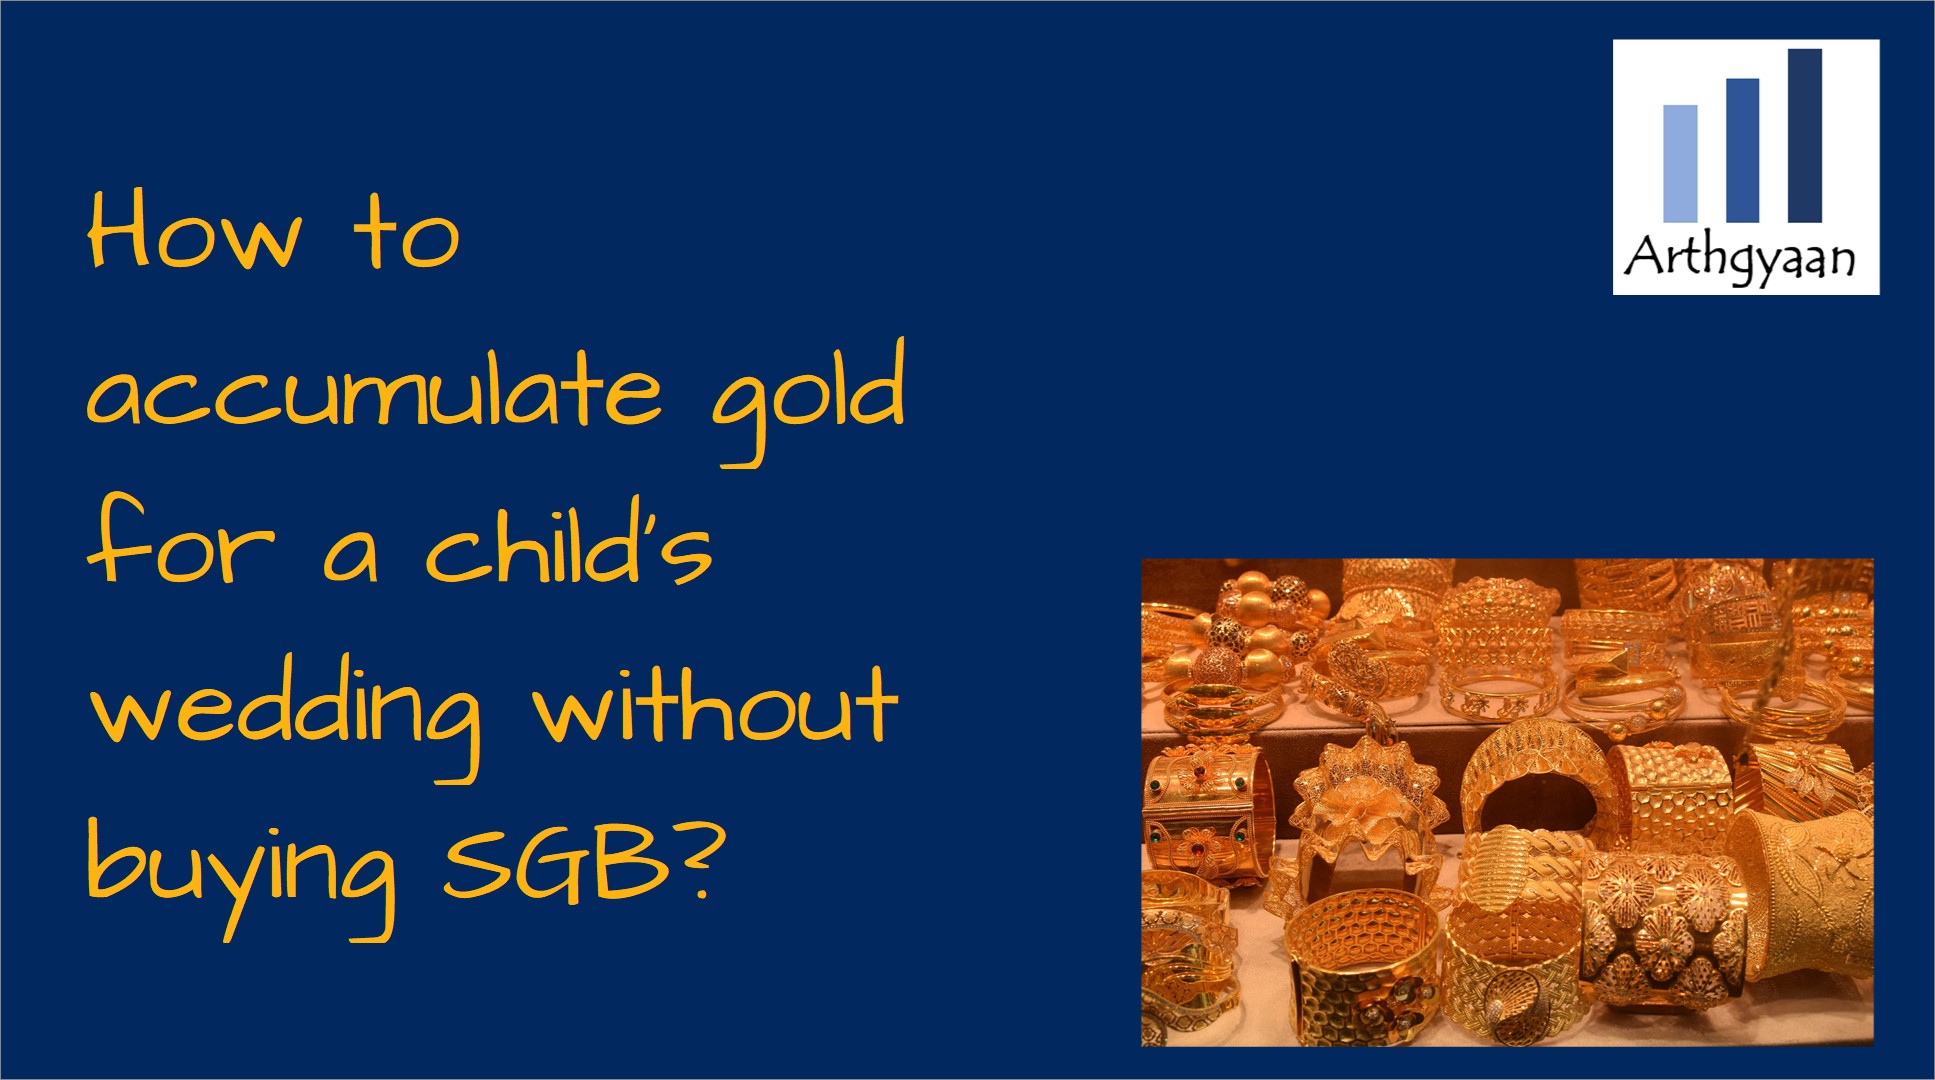 How to accumulate gold for a child's wedding without buying SGB?